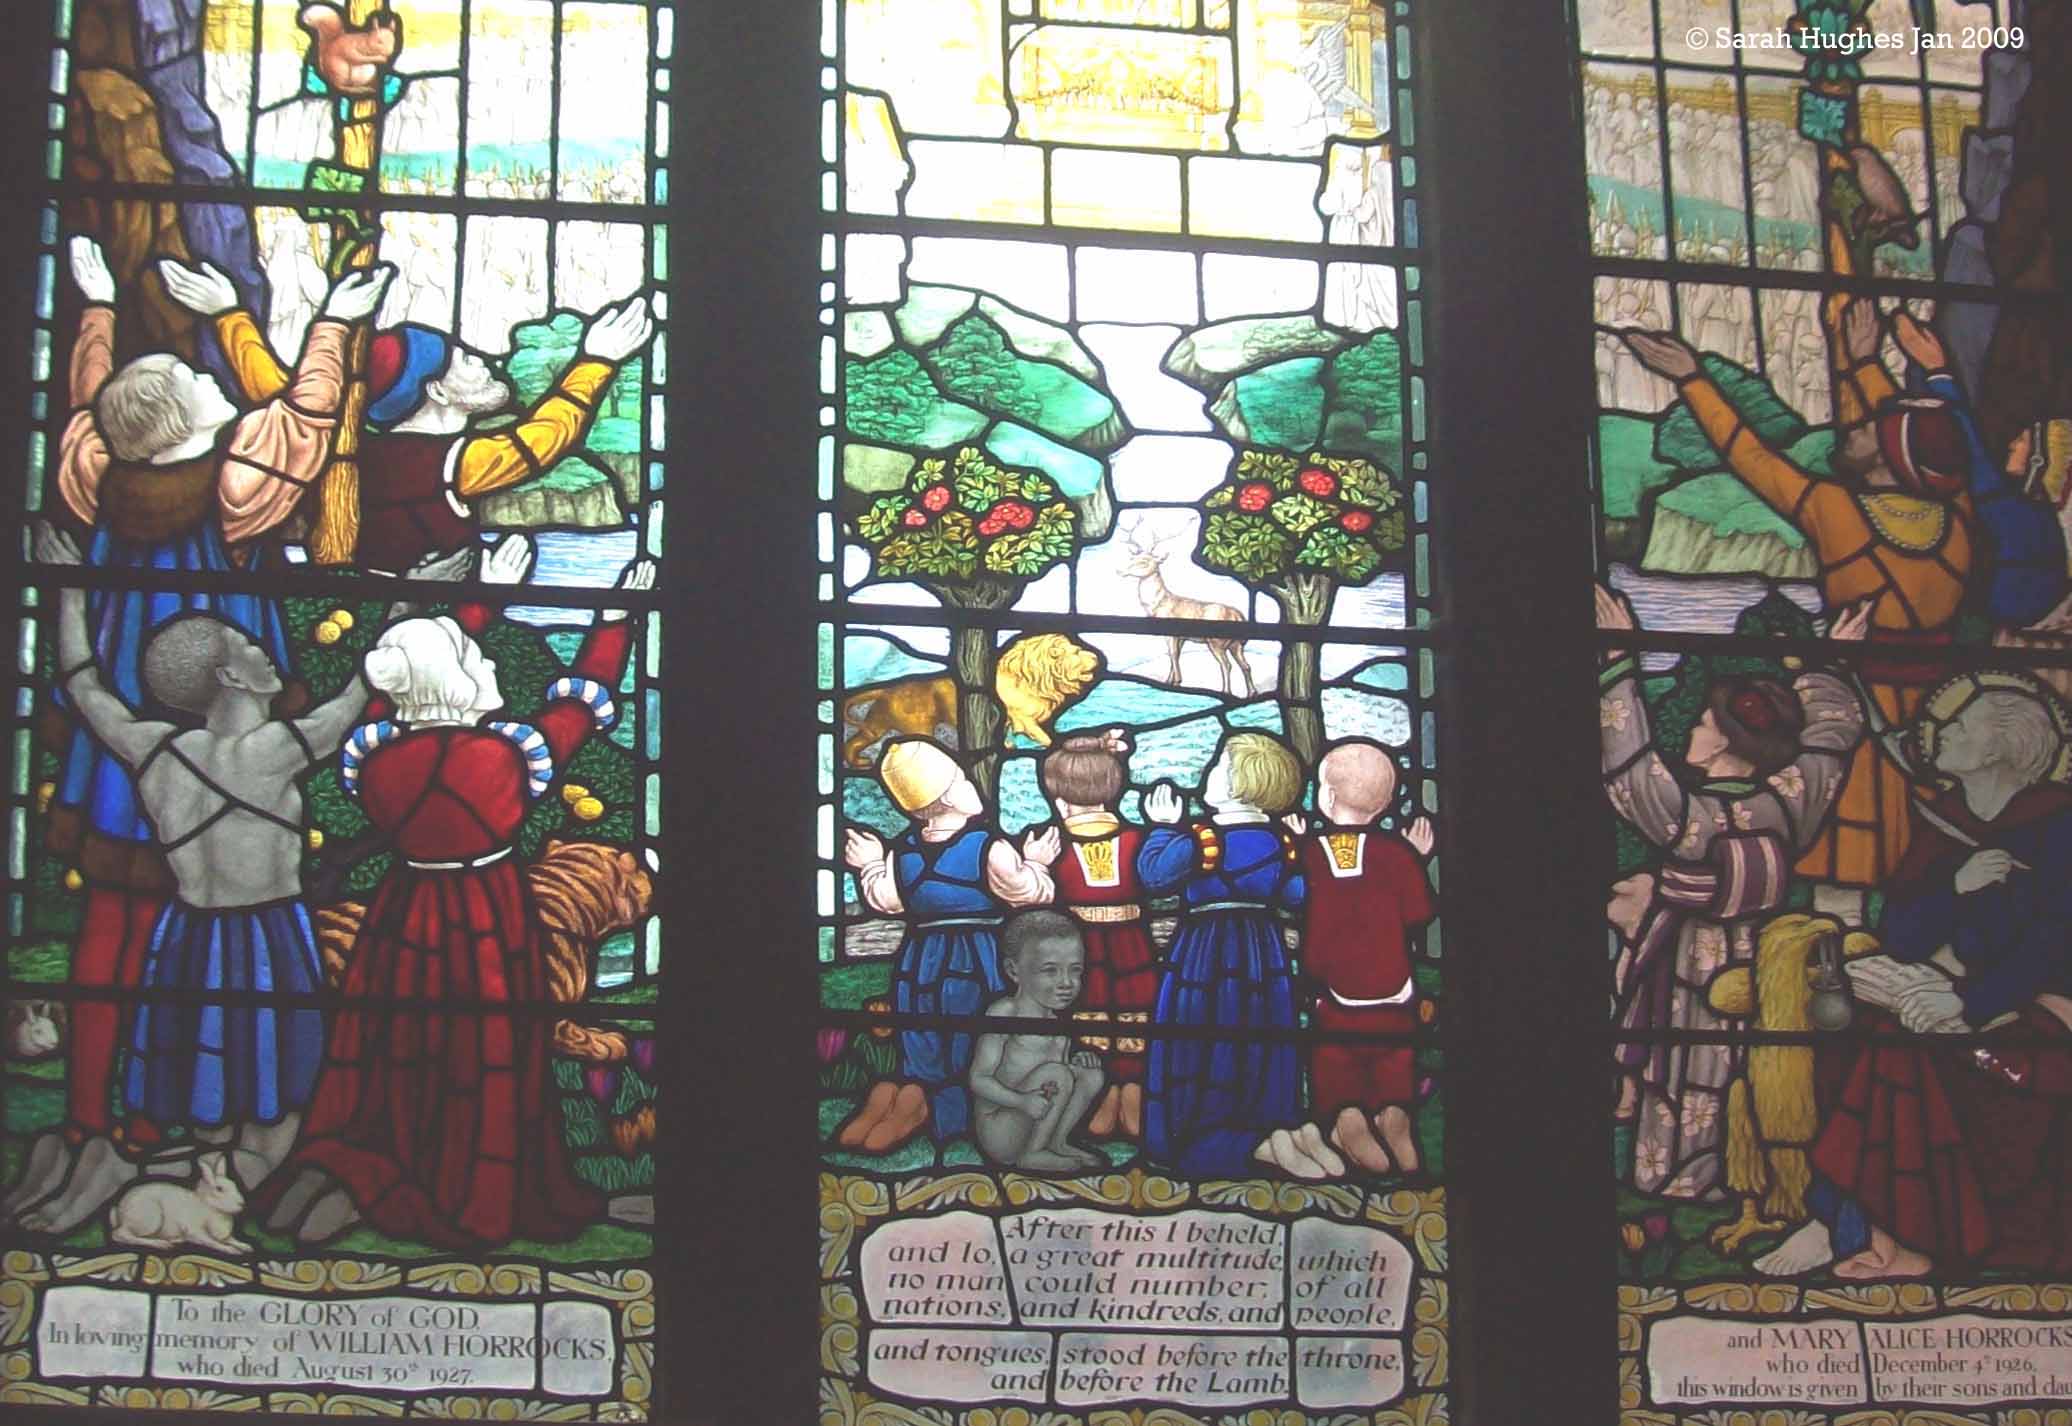 Detail of the Horrocks memorial stained glass window in Bedford St Thomas